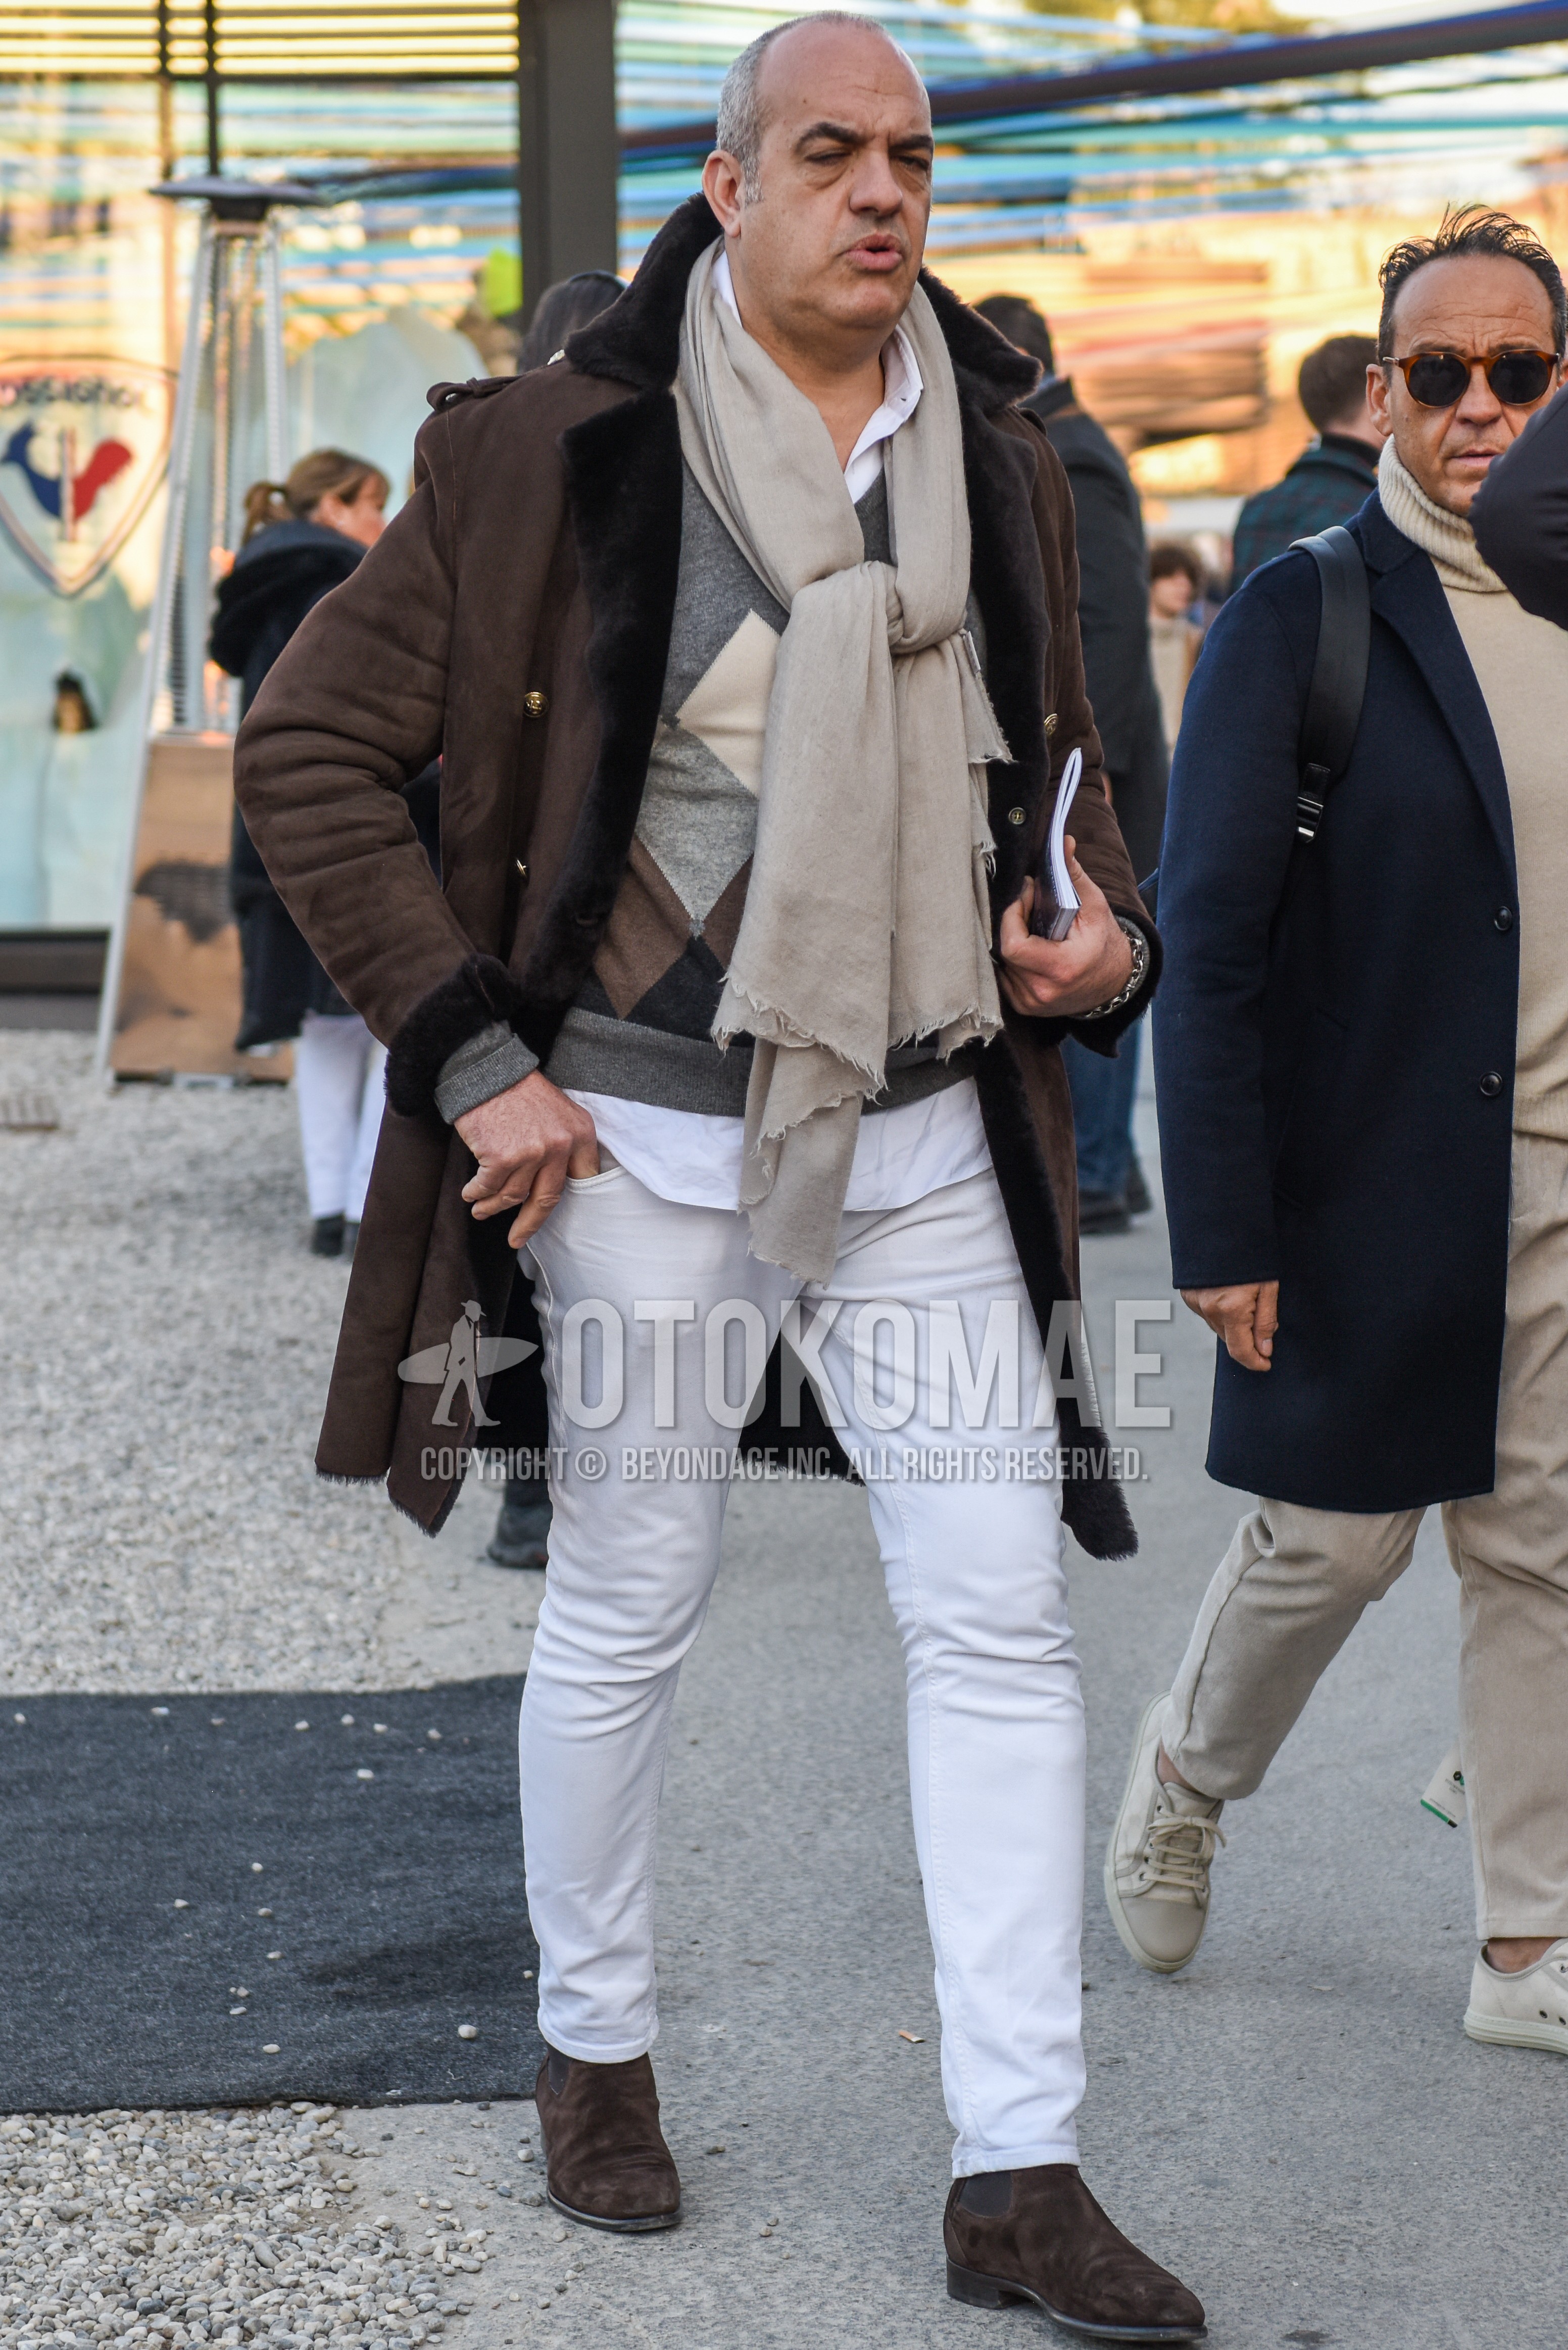 Men's autumn winter outfit with beige plain scarf, brown plain leather jacket, gray tops/innerwear sweater, white plain shirt, white plain cotton pants, brown side-gore boots.